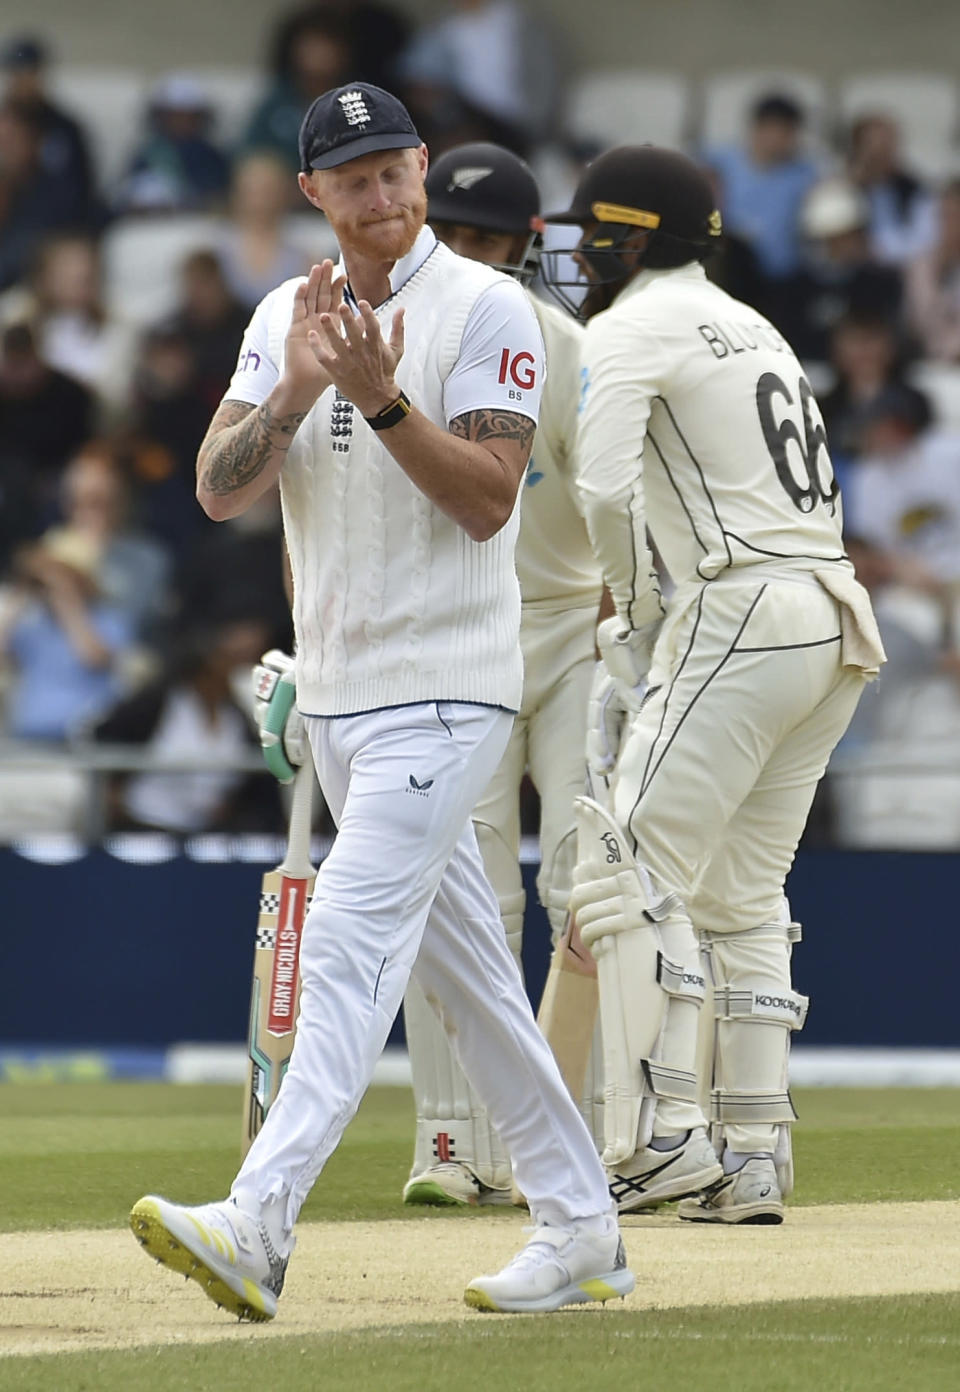 England's Ben Stokes reacts after a play during the fourth day of the third cricket test match between England and New Zealand at Headingley in Leeds, England, Sunday, June 26, 2022. (AP Photo/Rui Vieira)